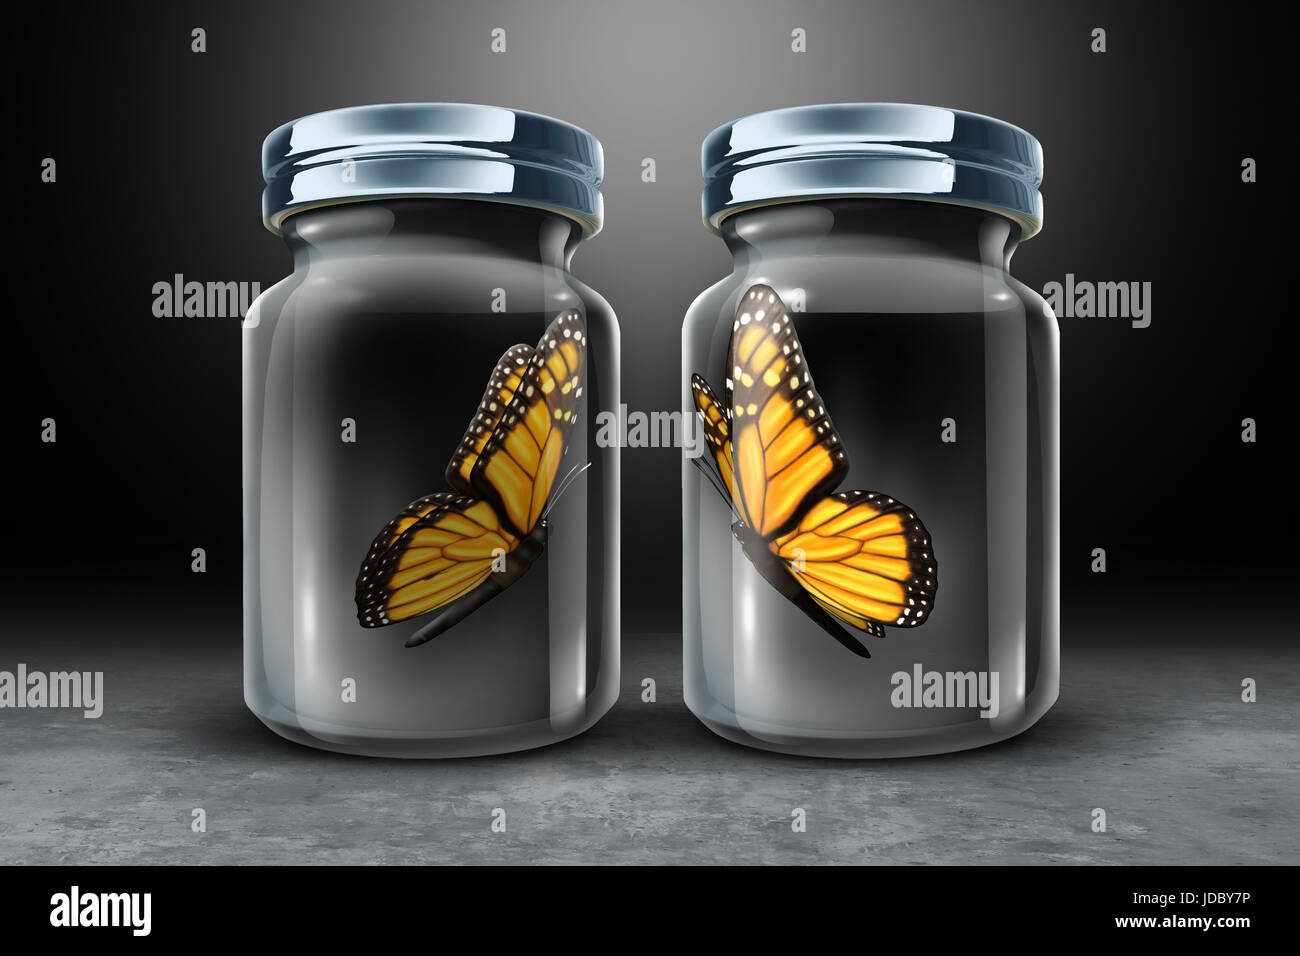 Barriers to communication and physical barrier concept as two butterflies in seperate closed glass as a jars as a 3D illustration. Stock Photo